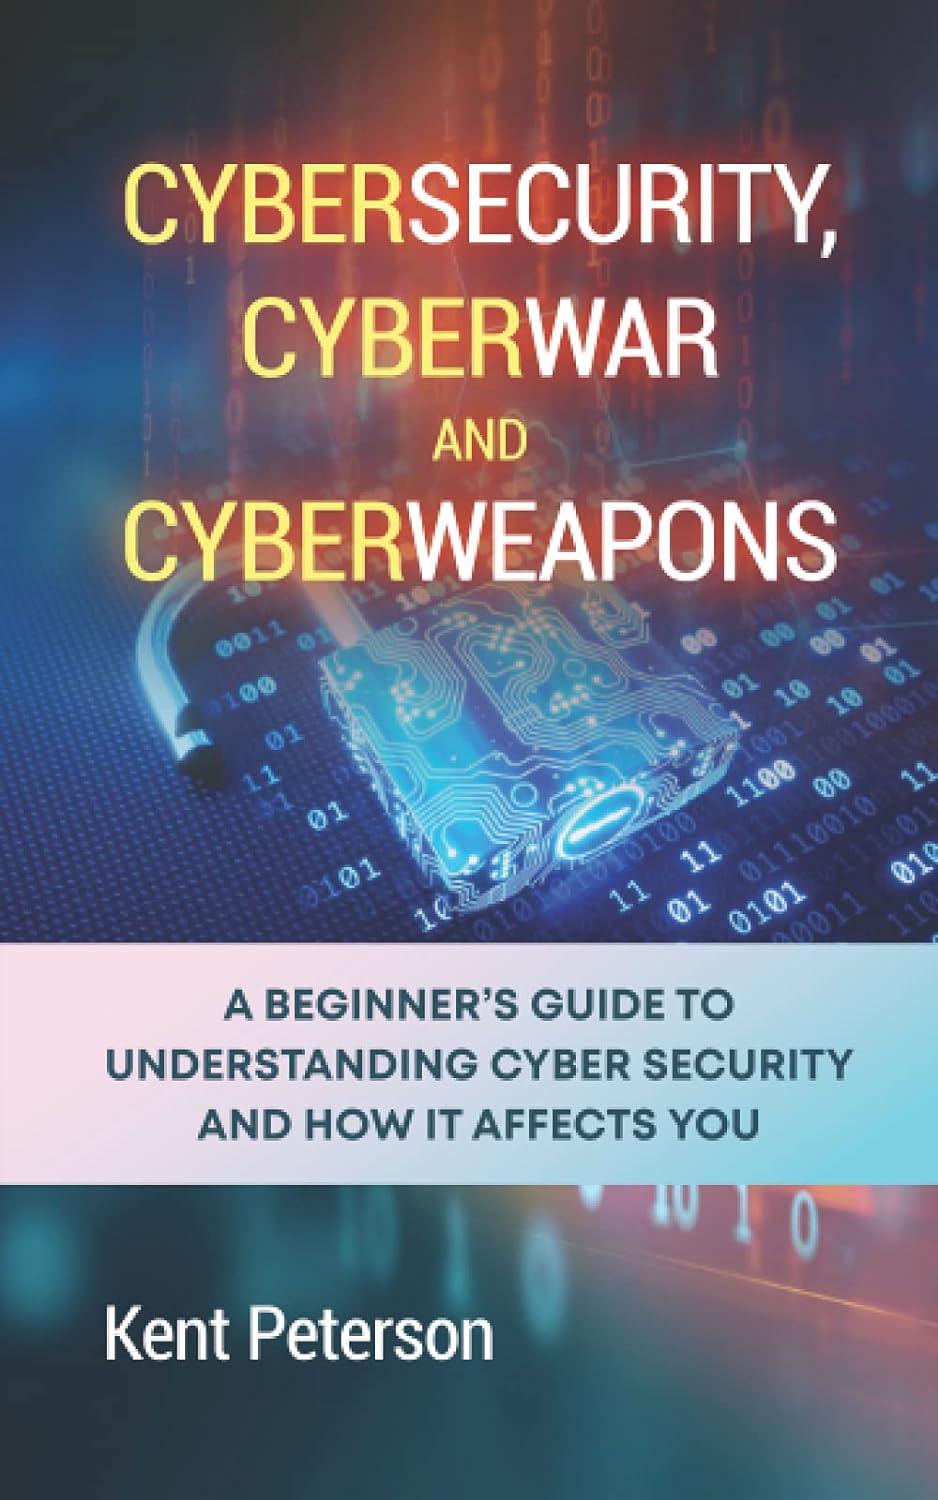 cybersecurity cyberwar and cyberweapon a beginners guide to understanding cyber security and how it affects